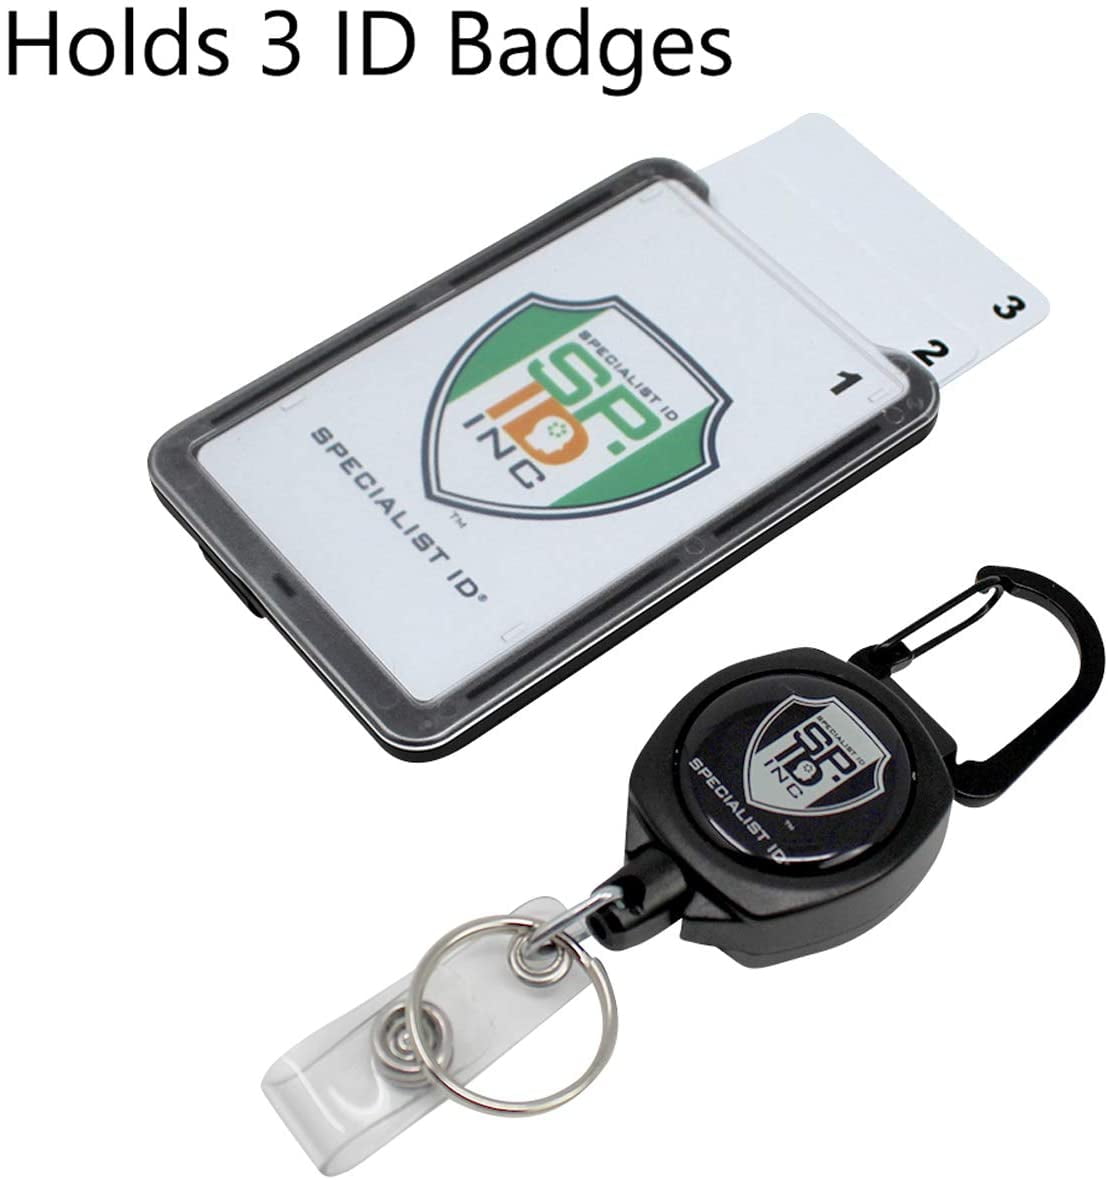 Super Heavy Duty Sidekick Retractable Badge and Key Reel - Carabiner Clip -  with Three Card ID Badge Holder (Holds 3 Badges) by Specialist ID 